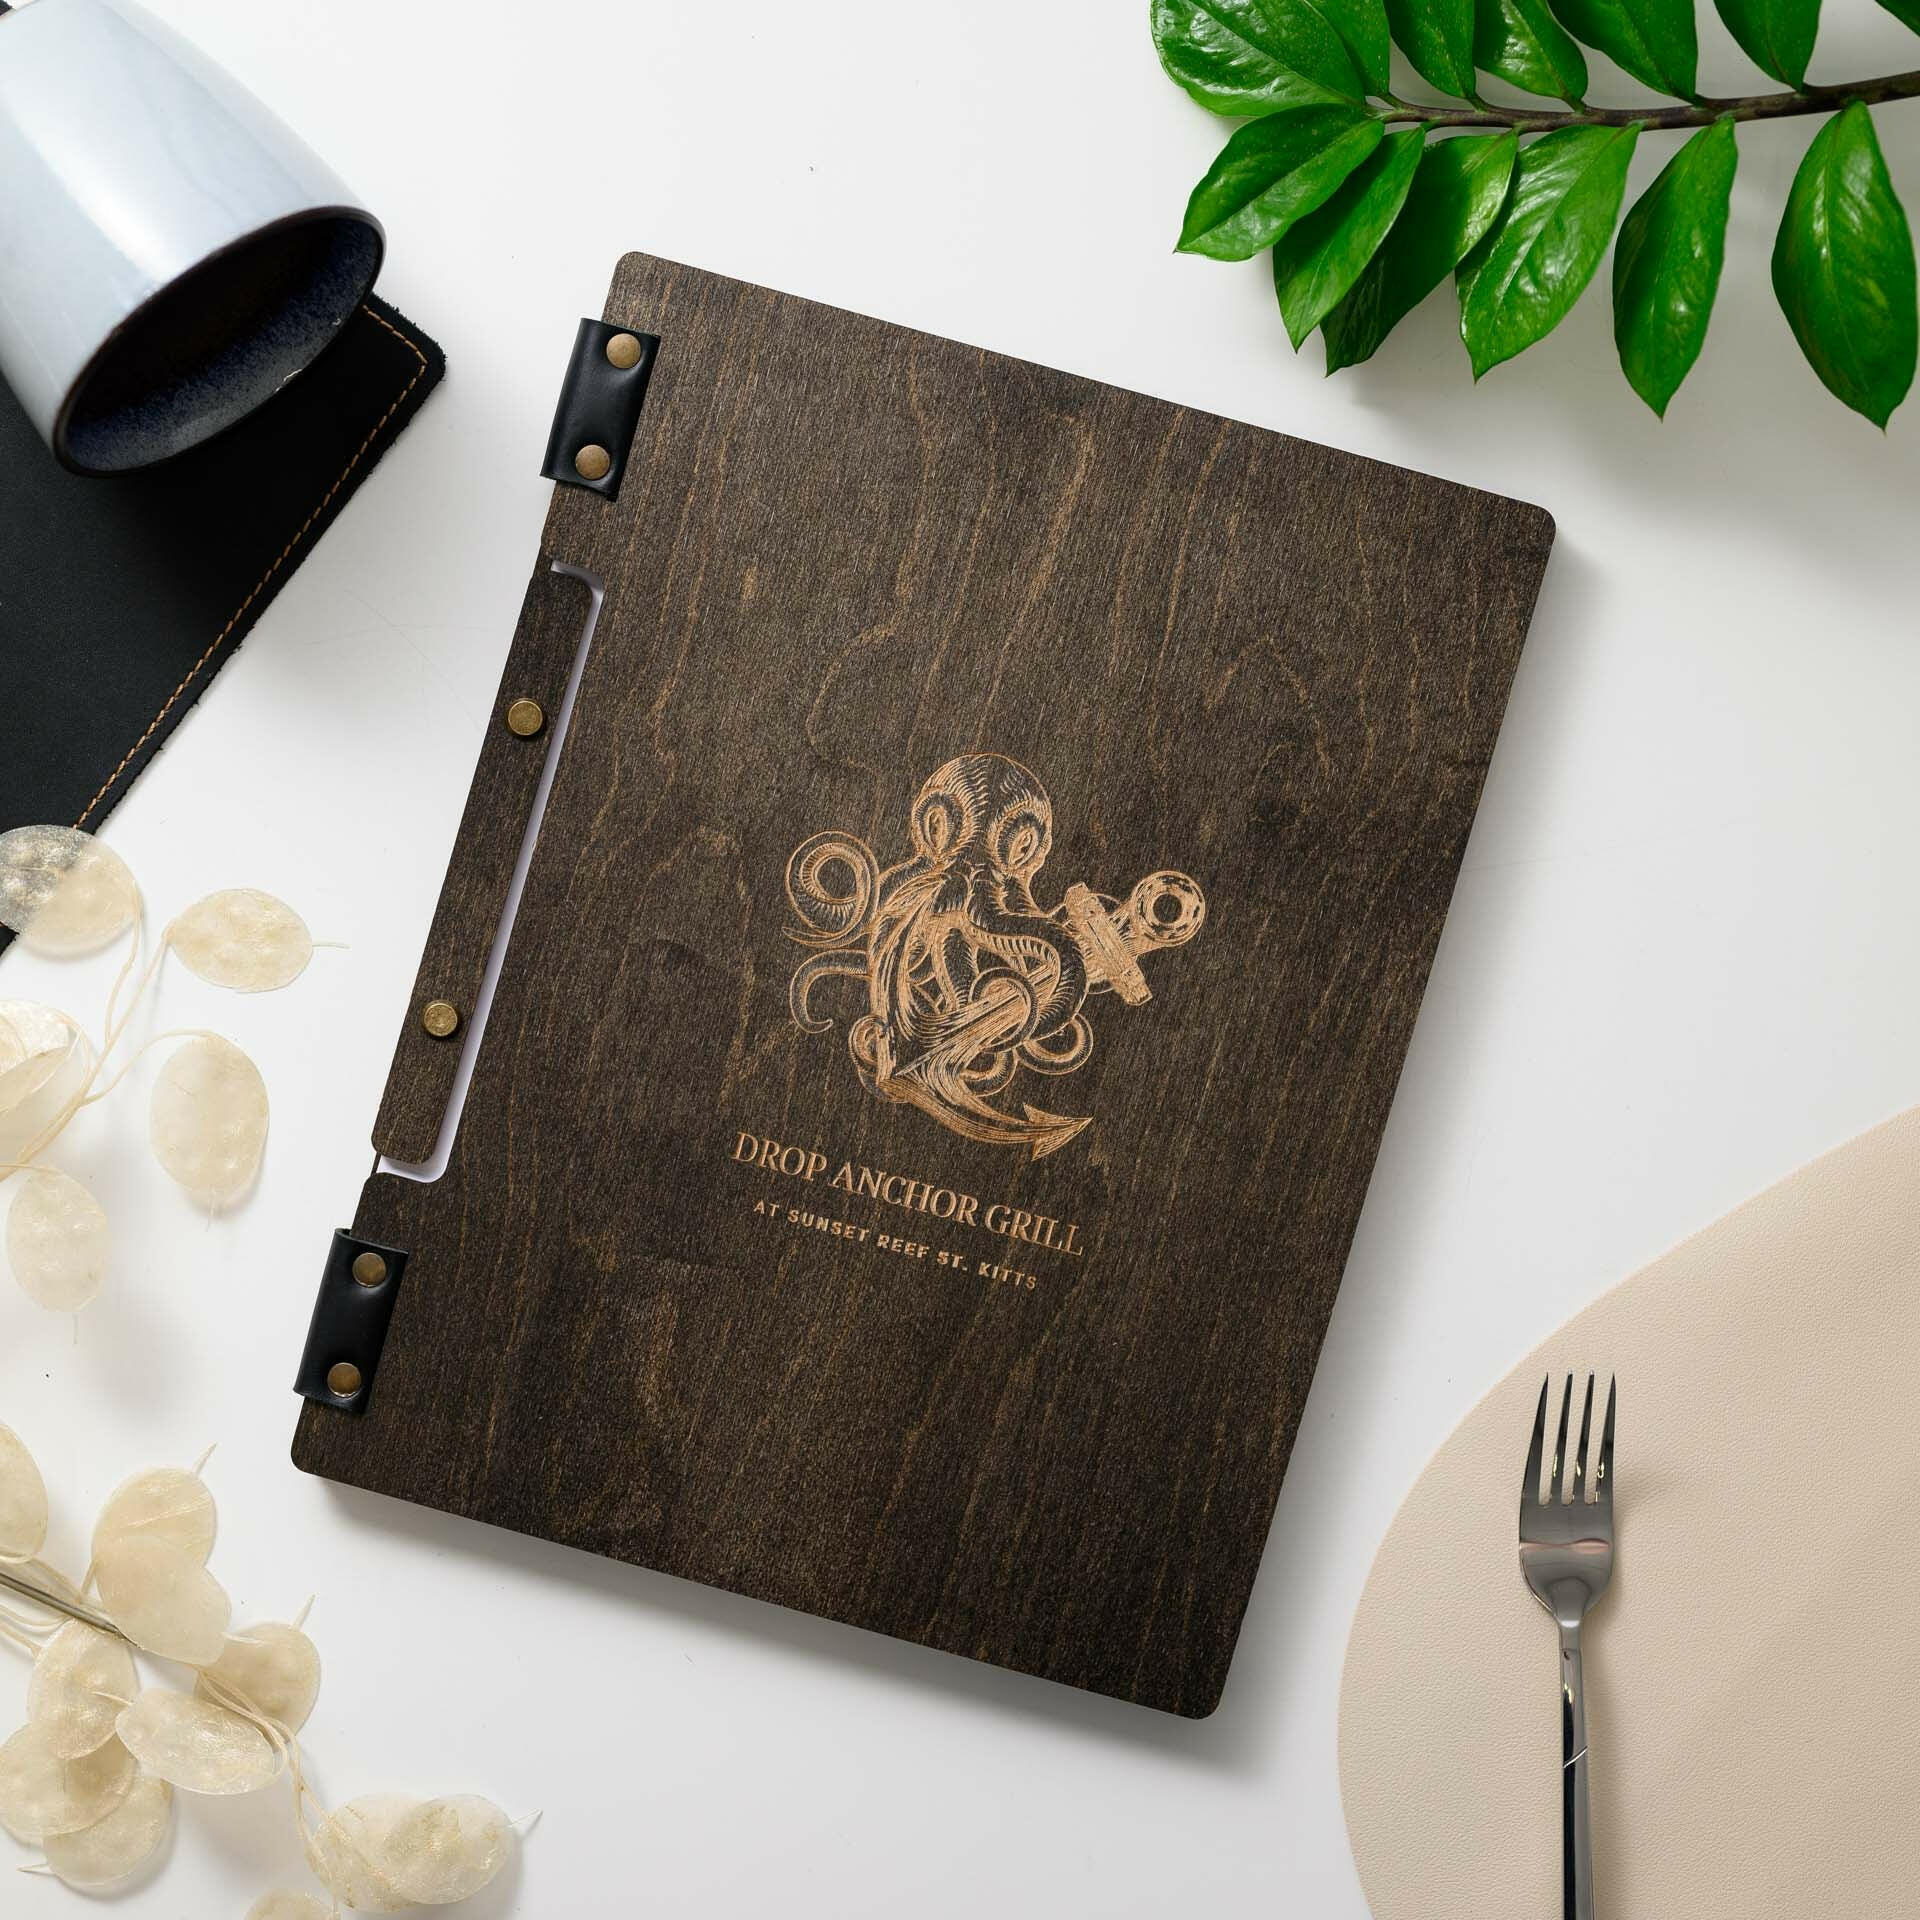 Engraved Menu Holder: Adds personalized charm to your menu presentation.